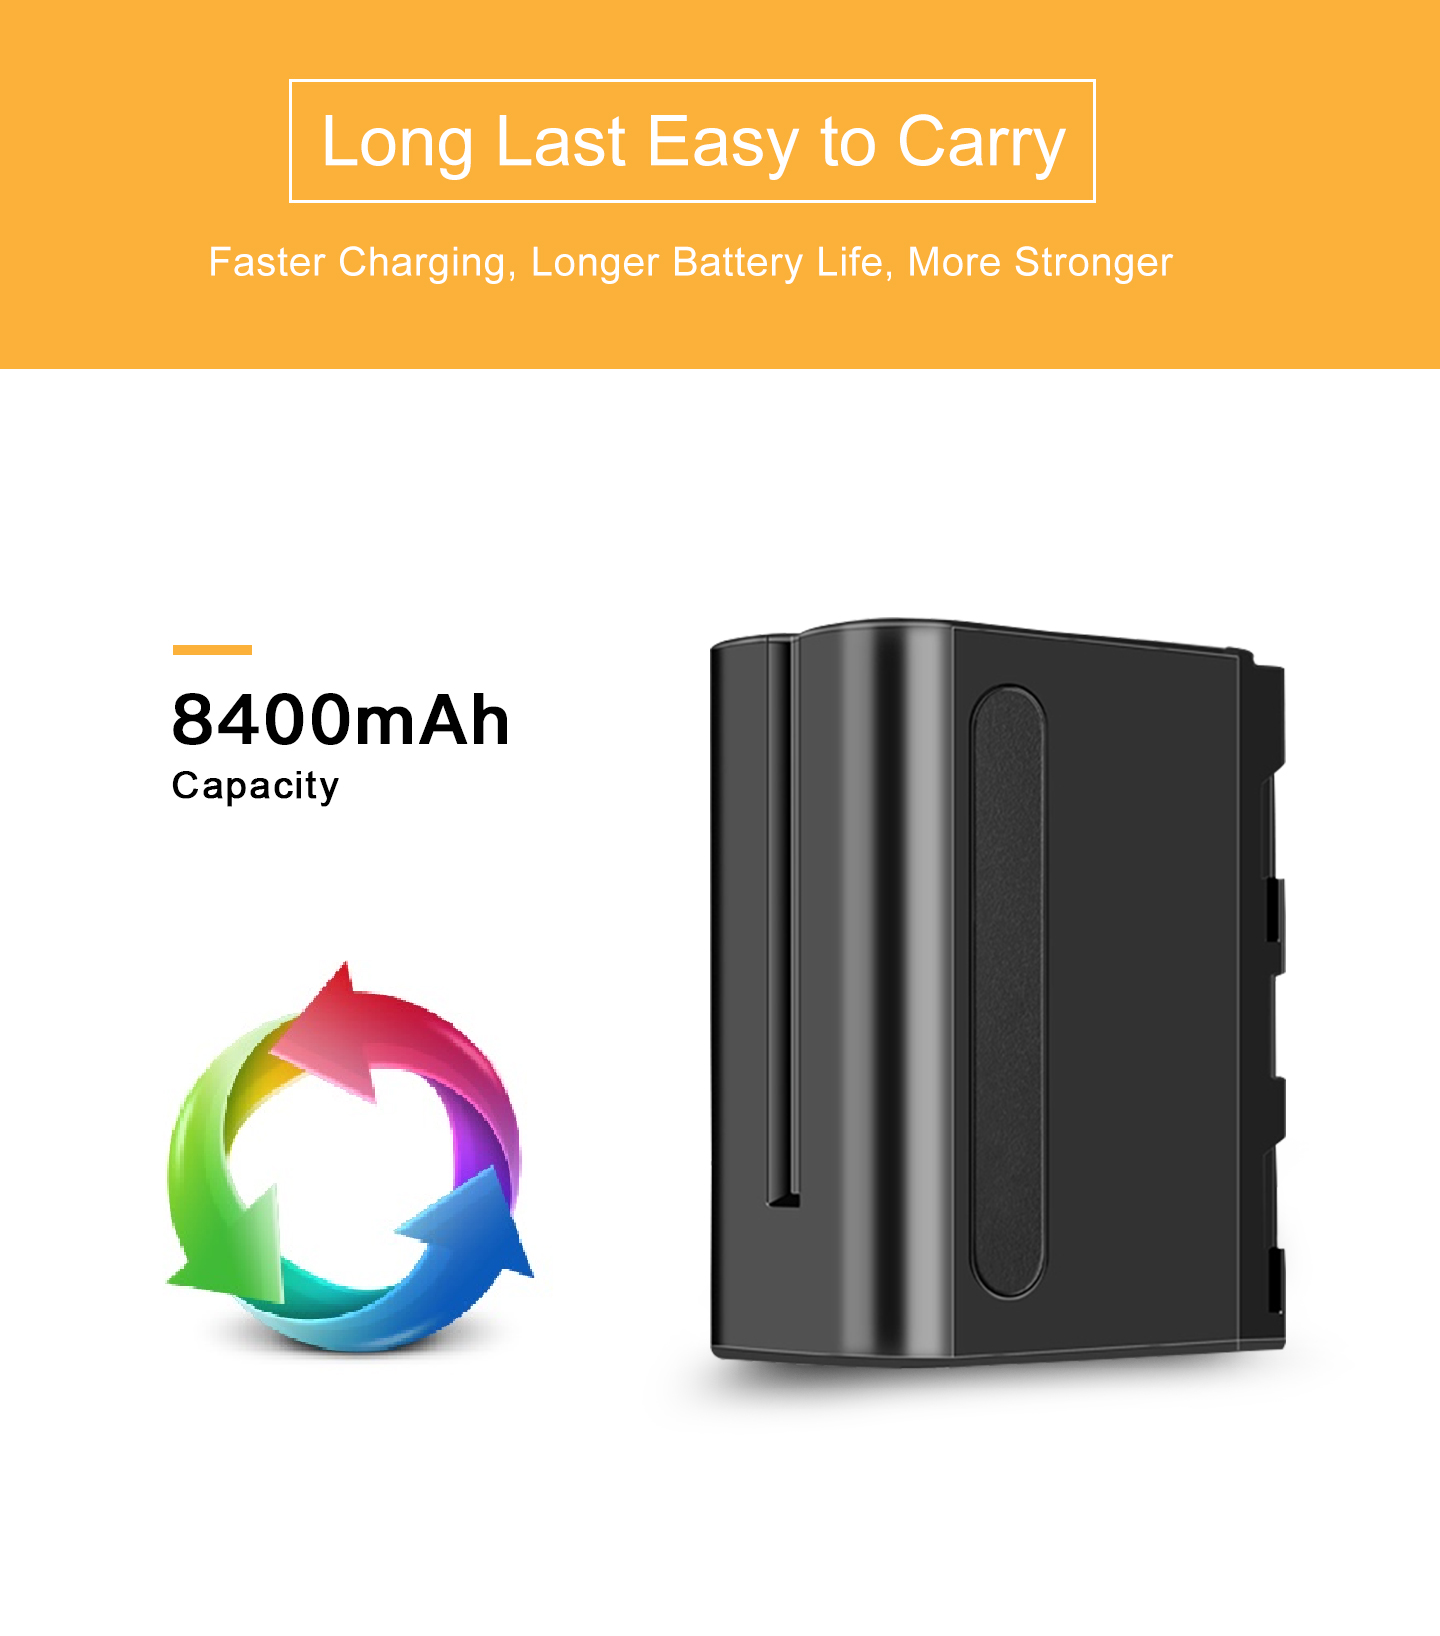 Long Last Easy to Carry